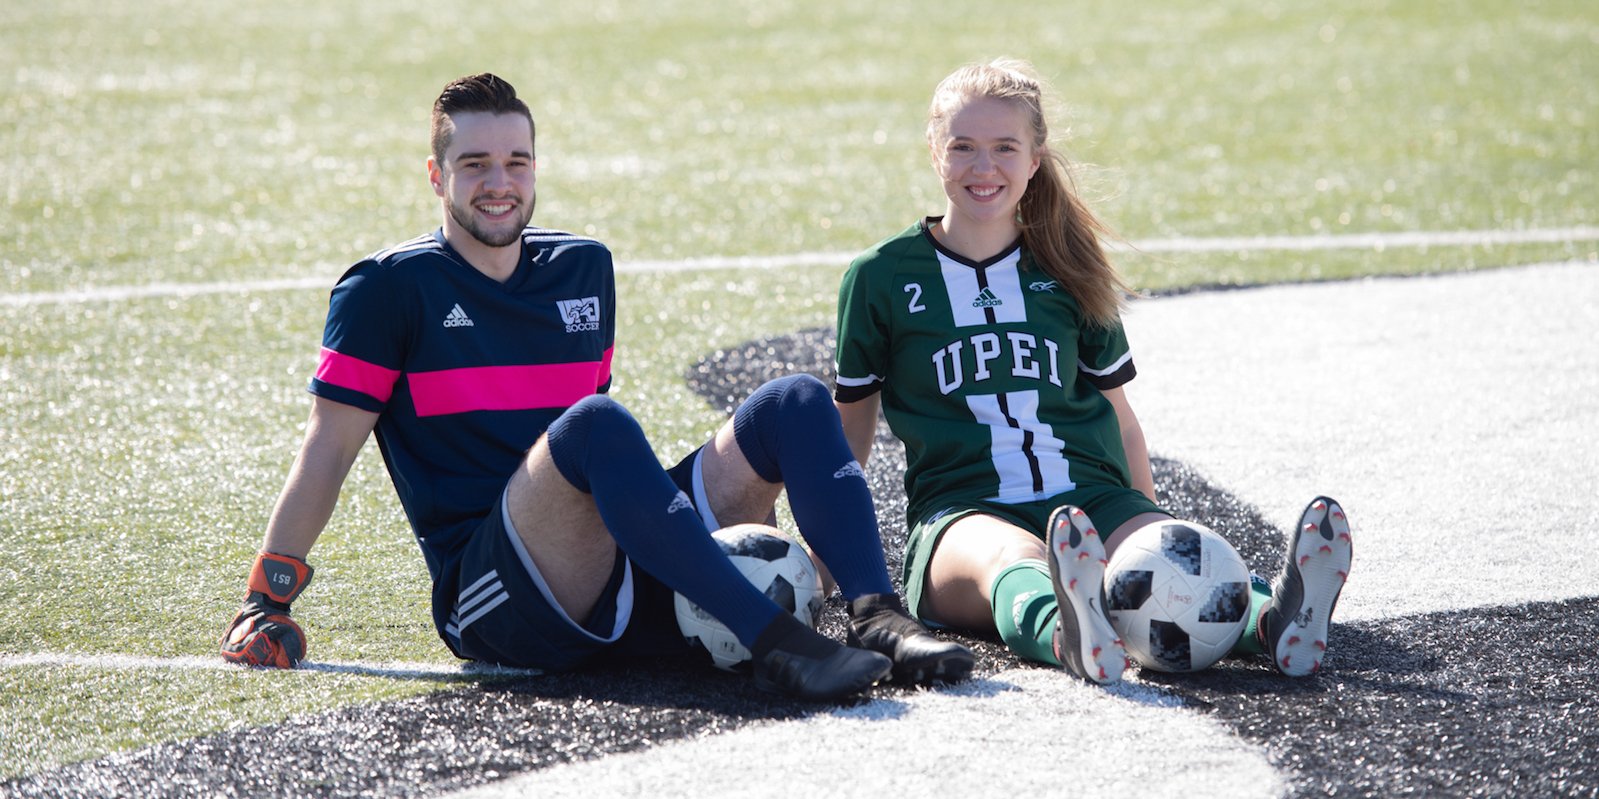 two UPEI soccer panthers smiling on the pitch